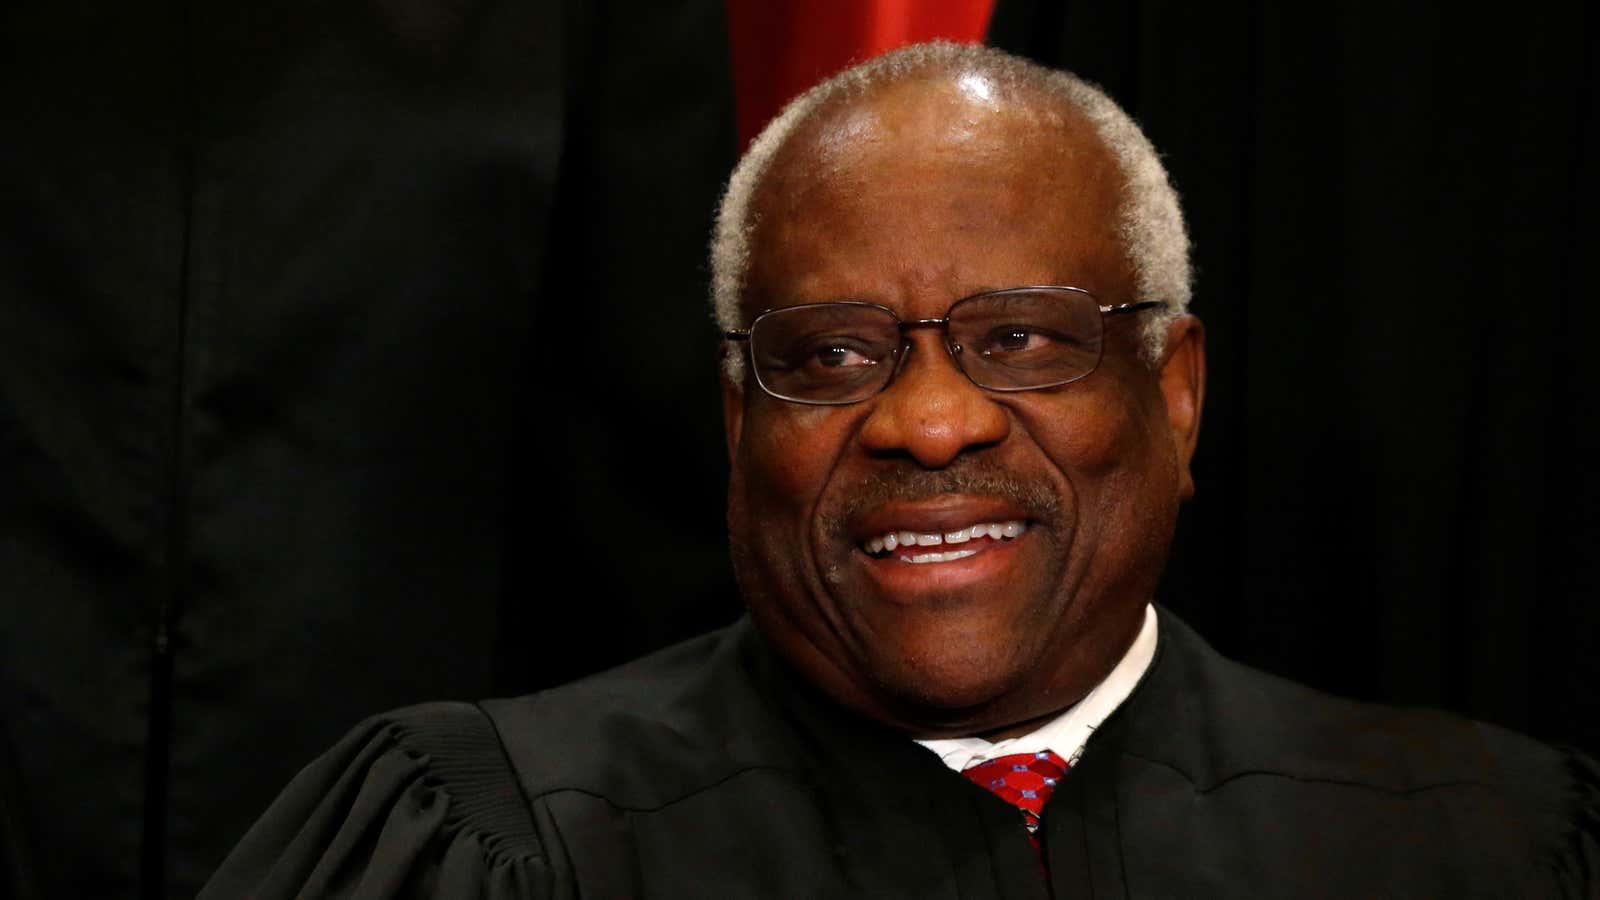 Justice Clarence Thomas isn’t a big talker but he certainly has opinions.